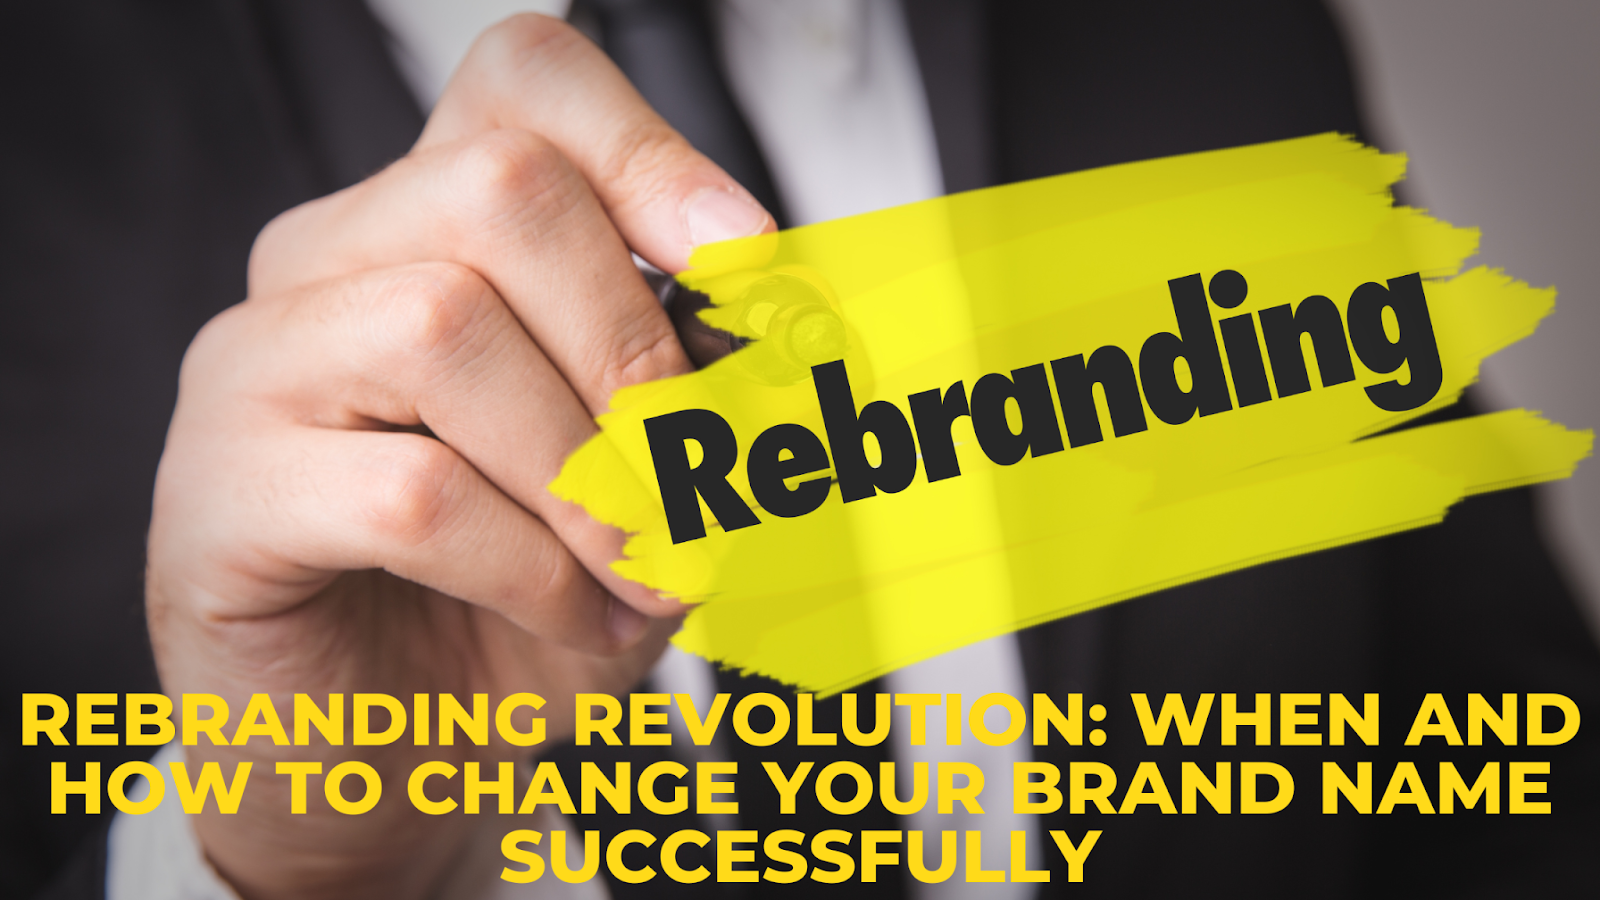 Rebranding Revolution: When and How to Change Your Brand Name Successfully